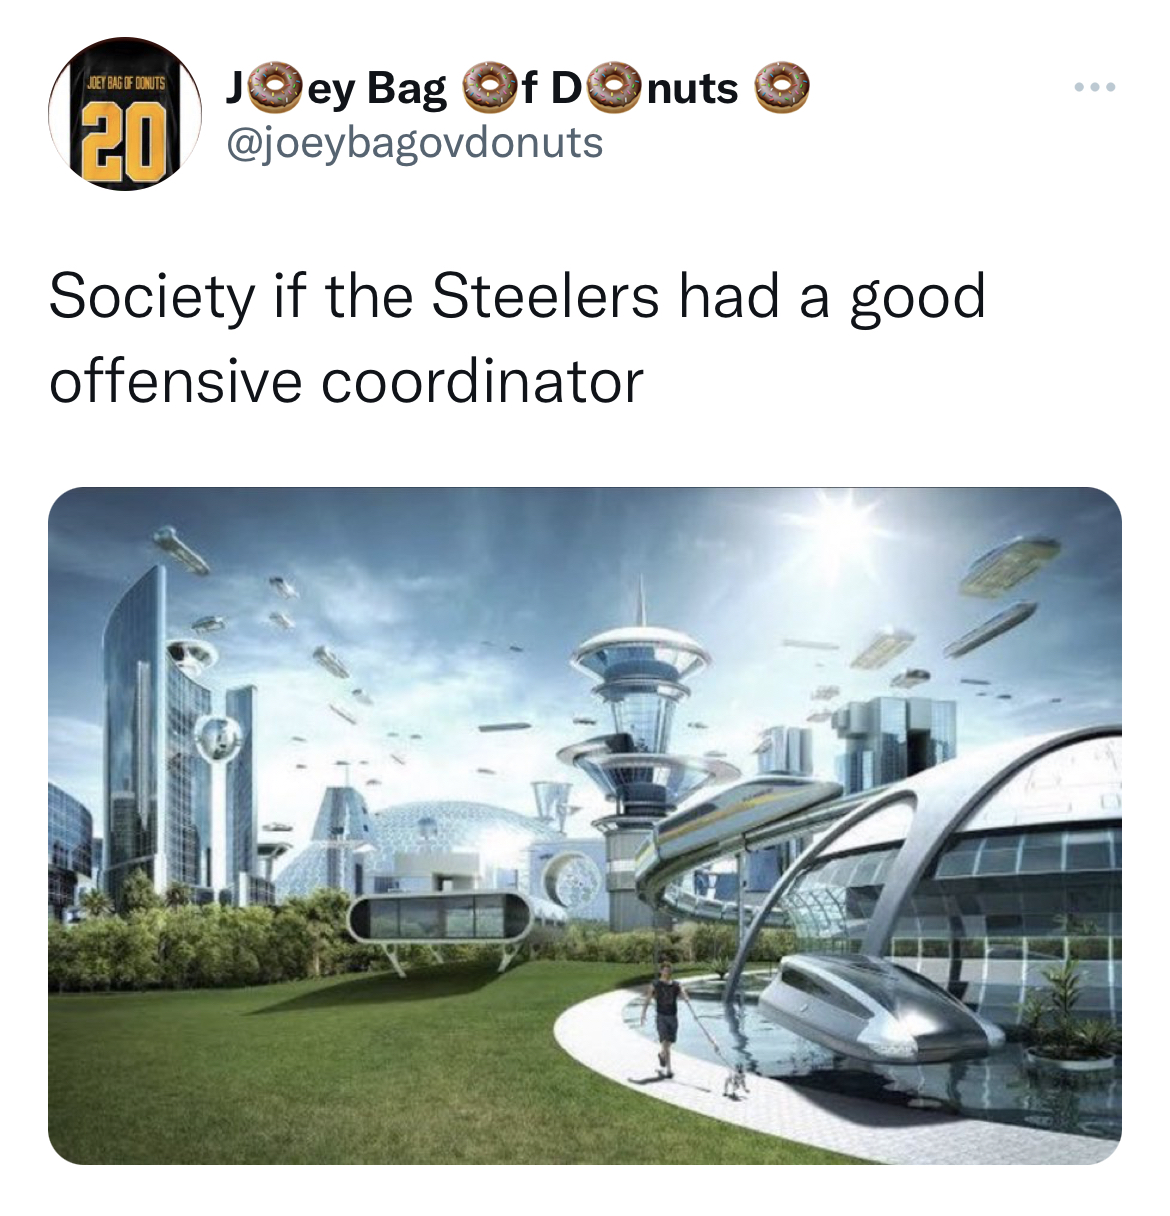 salty and savage nfl memes - world if didn t exist - Joey Bag Of Donuts 20 Society if the Steelers had a good offensive coordinator